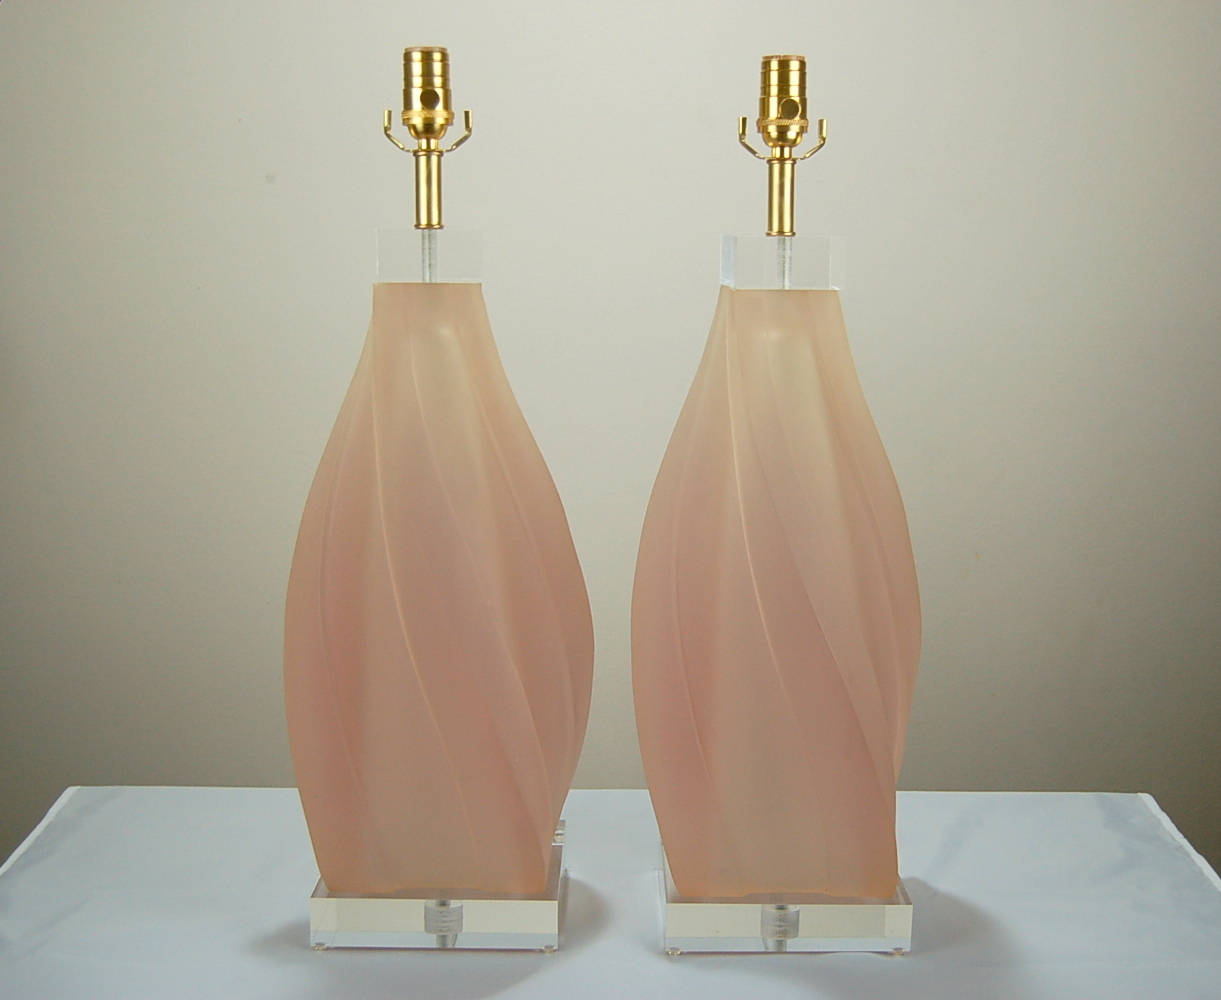 1980s Art Deco Revival Paolo Gucci Table Lamp